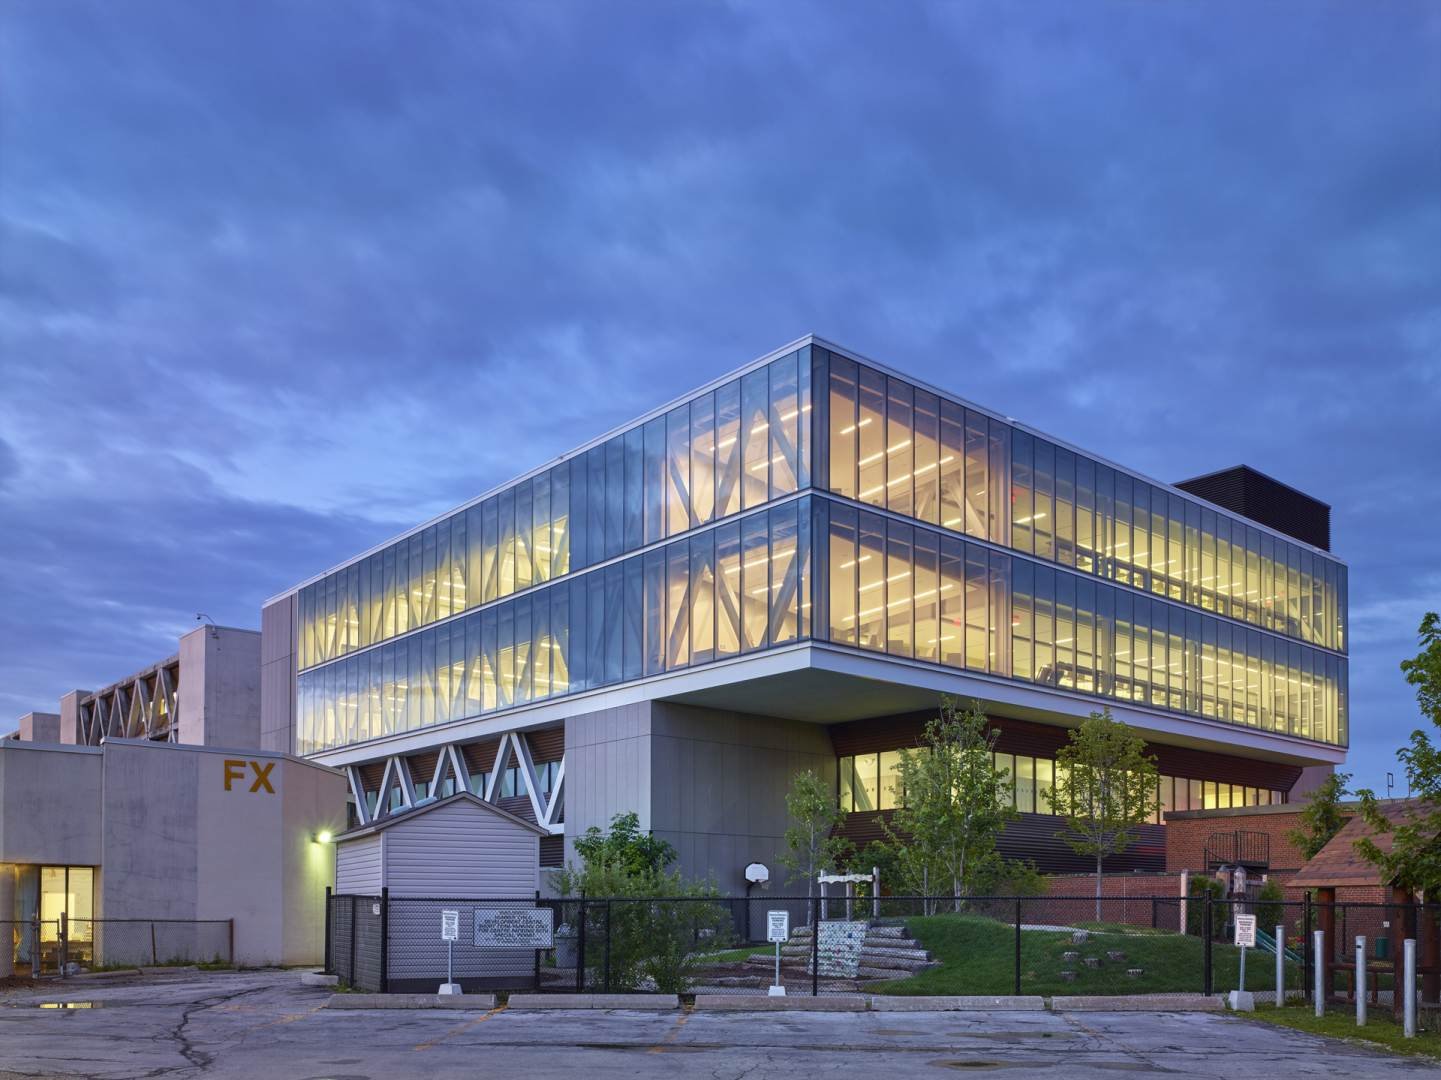 Humber College Building F (Funeral + Science) Addition